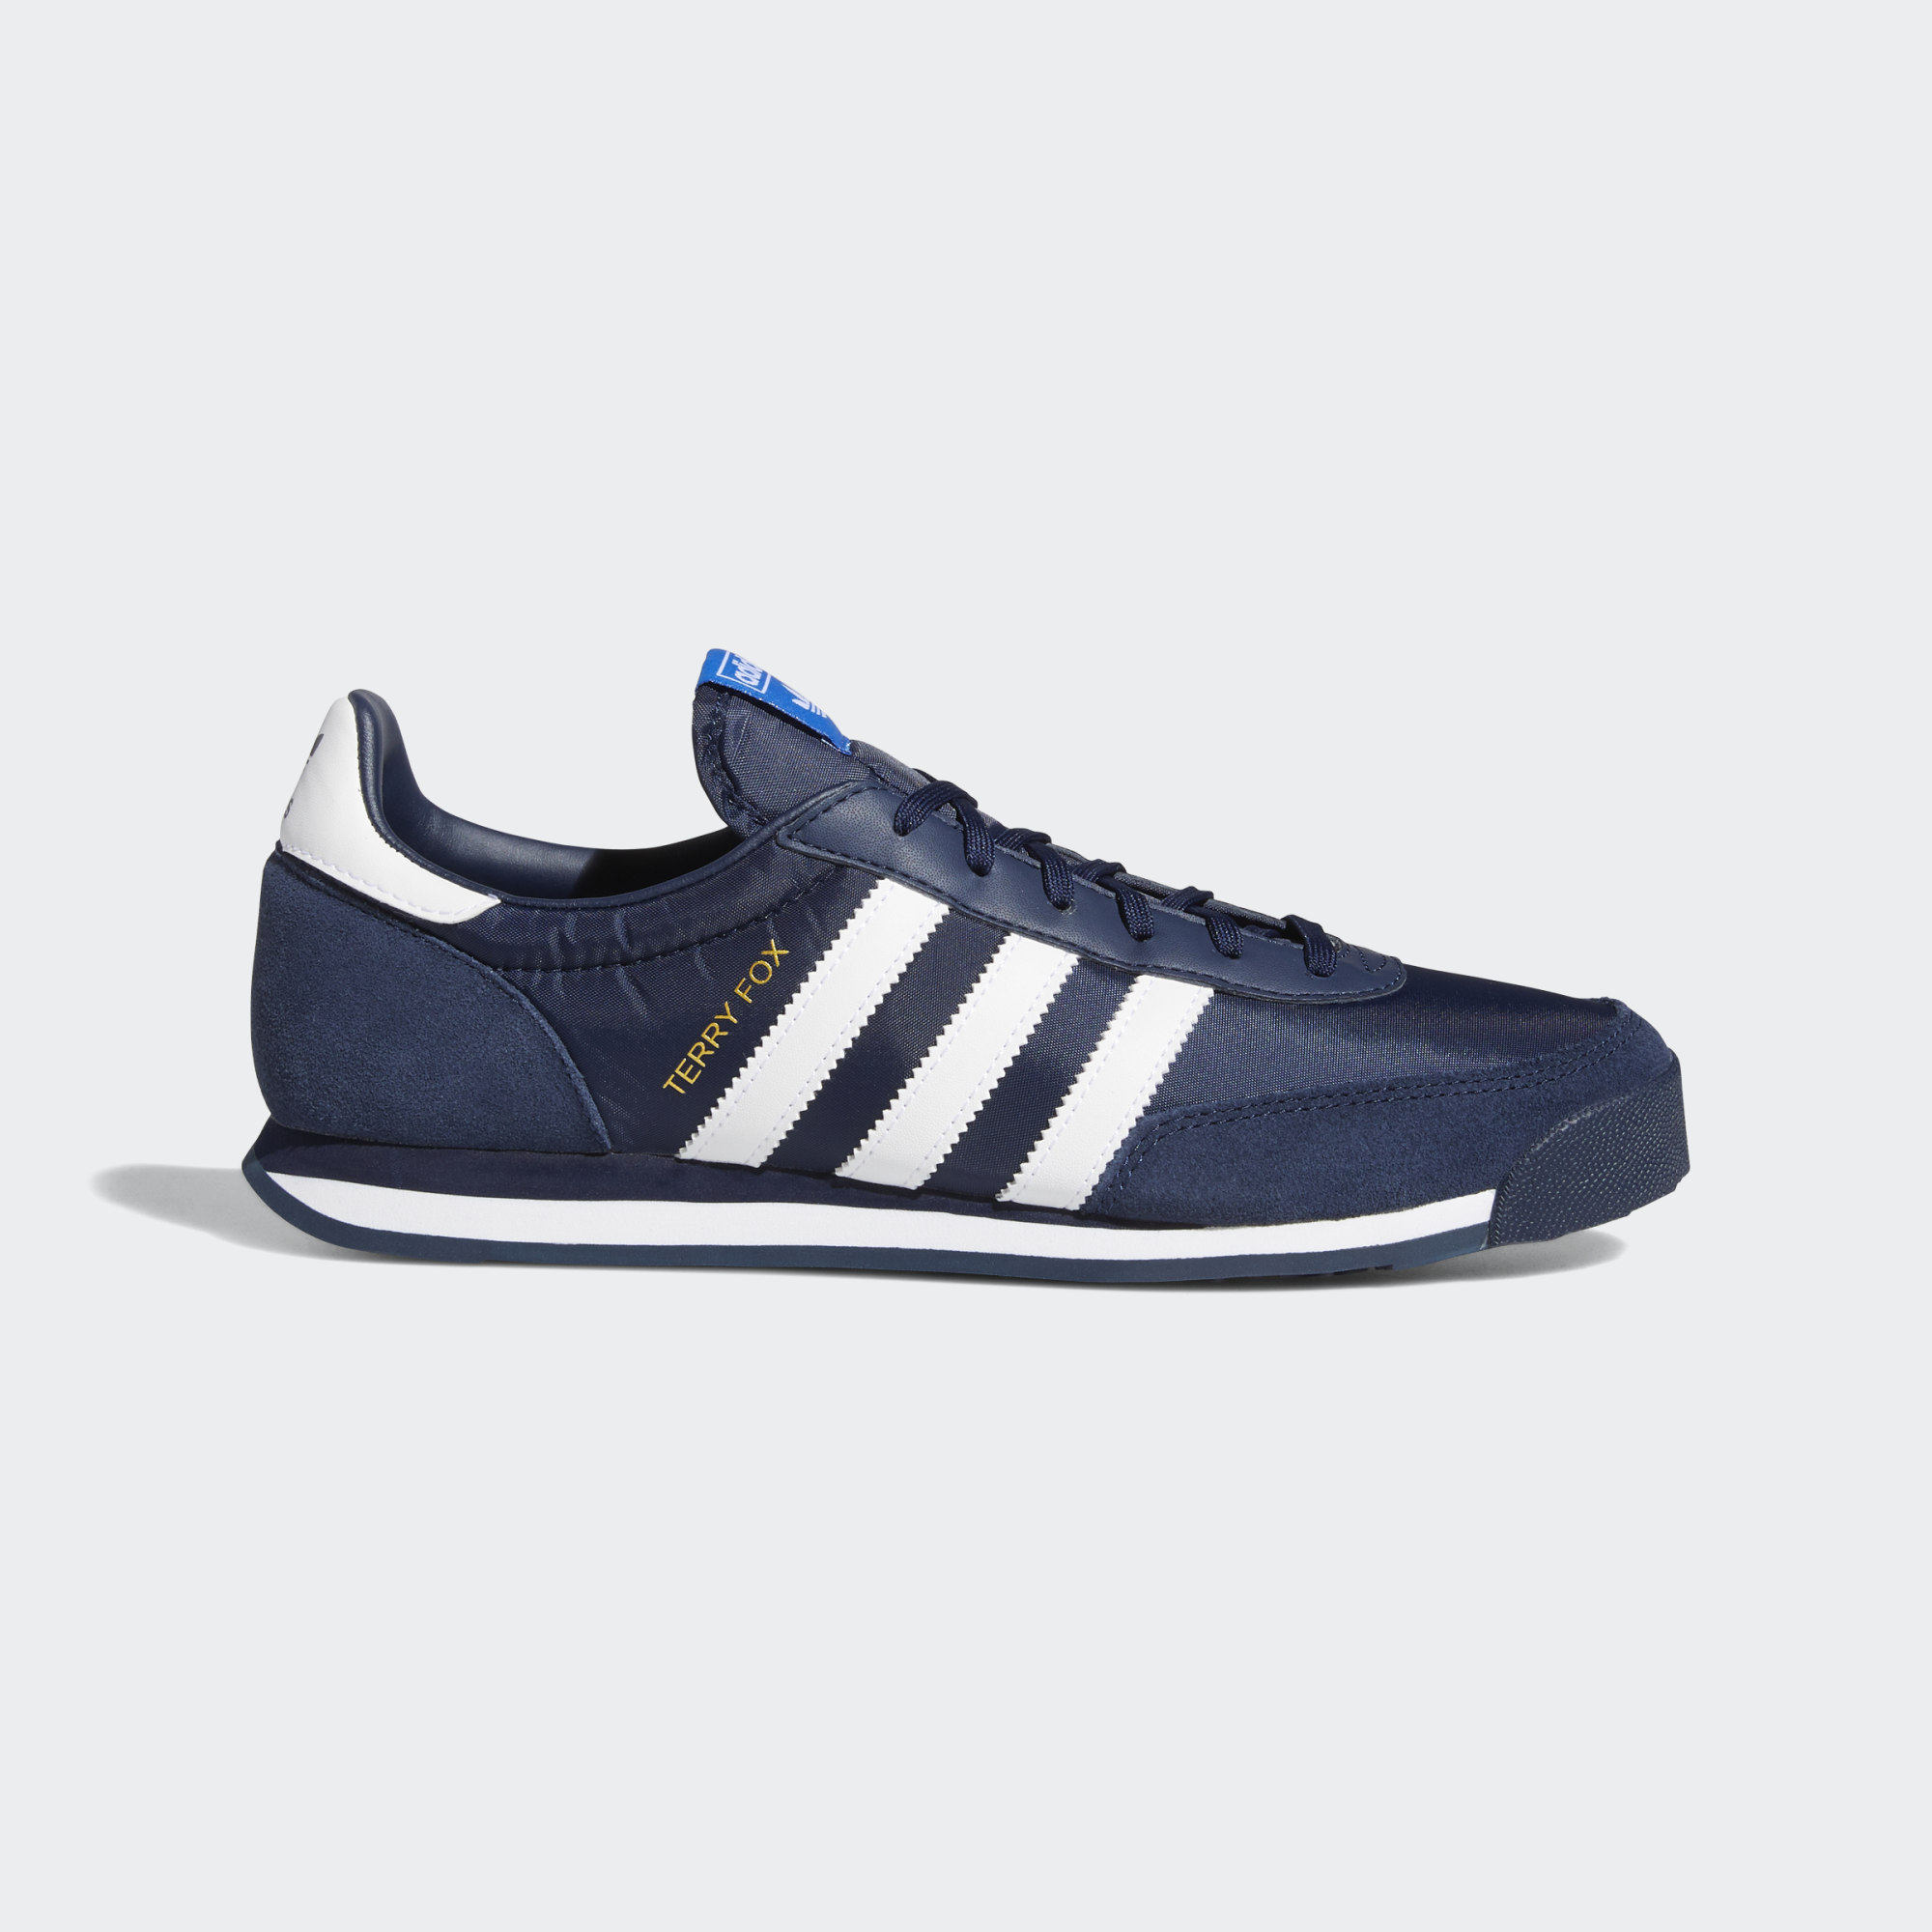 purchase adidas sneakers online